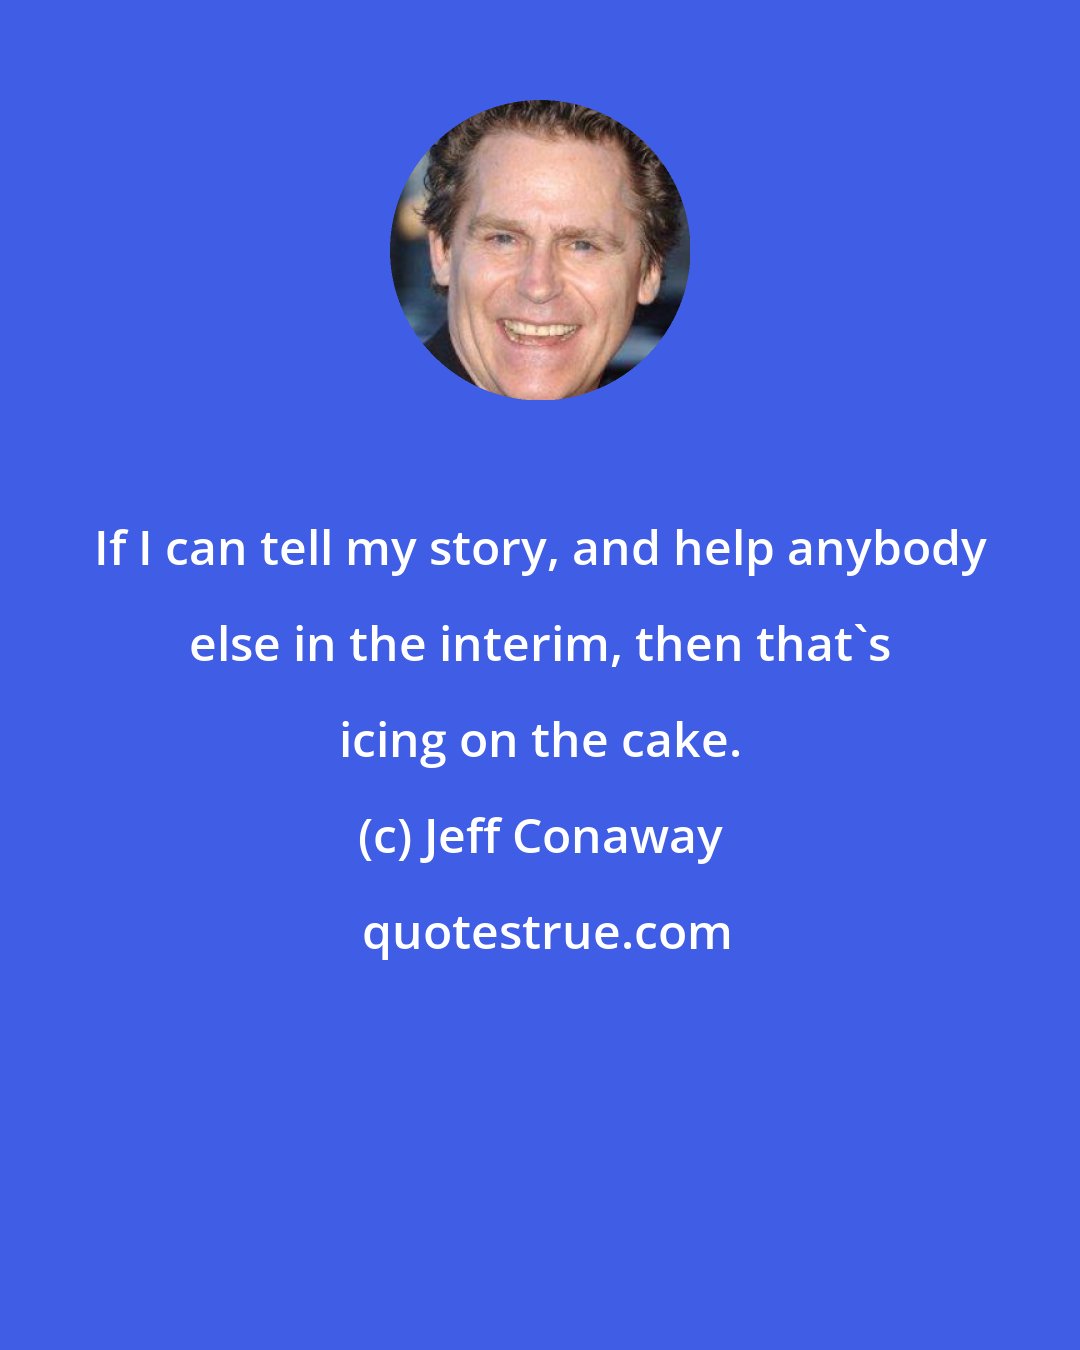 Jeff Conaway: If I can tell my story, and help anybody else in the interim, then that's icing on the cake.